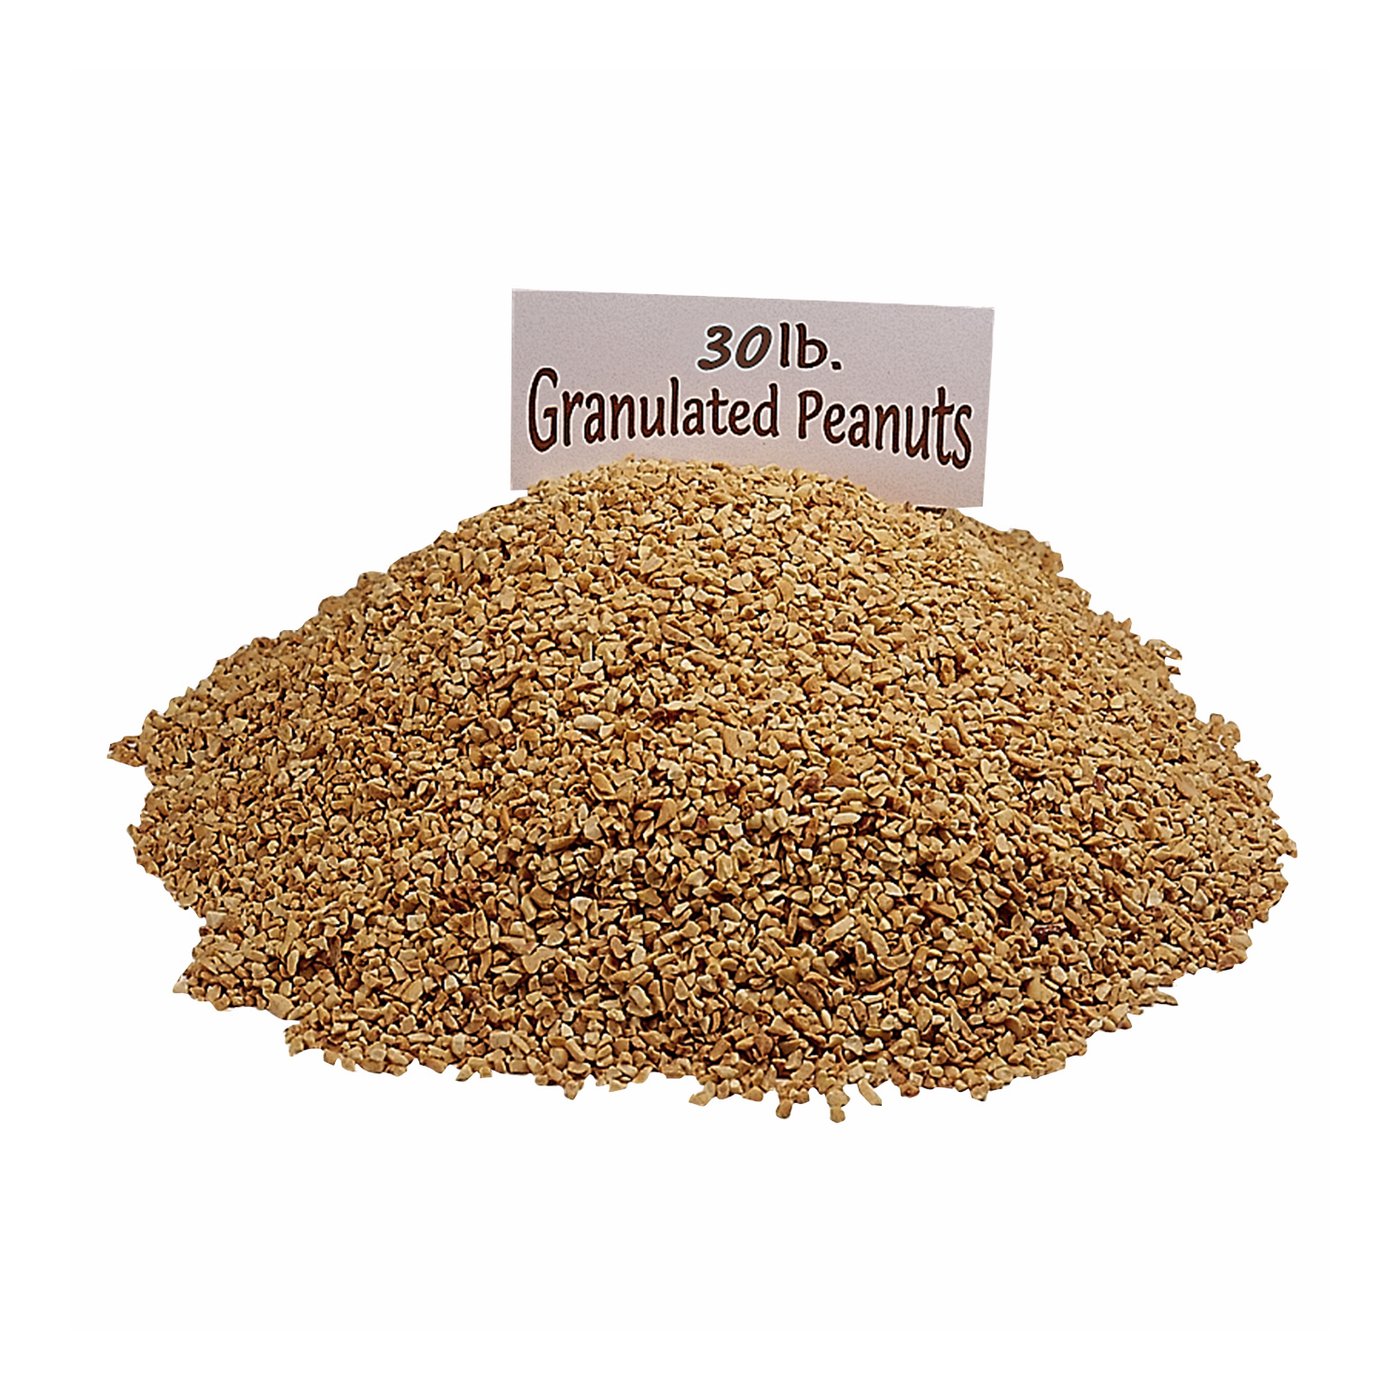 Gold Medal 4128, 30 lb Granulated Peanuts Topping for Caramel Apples, Ice Cream